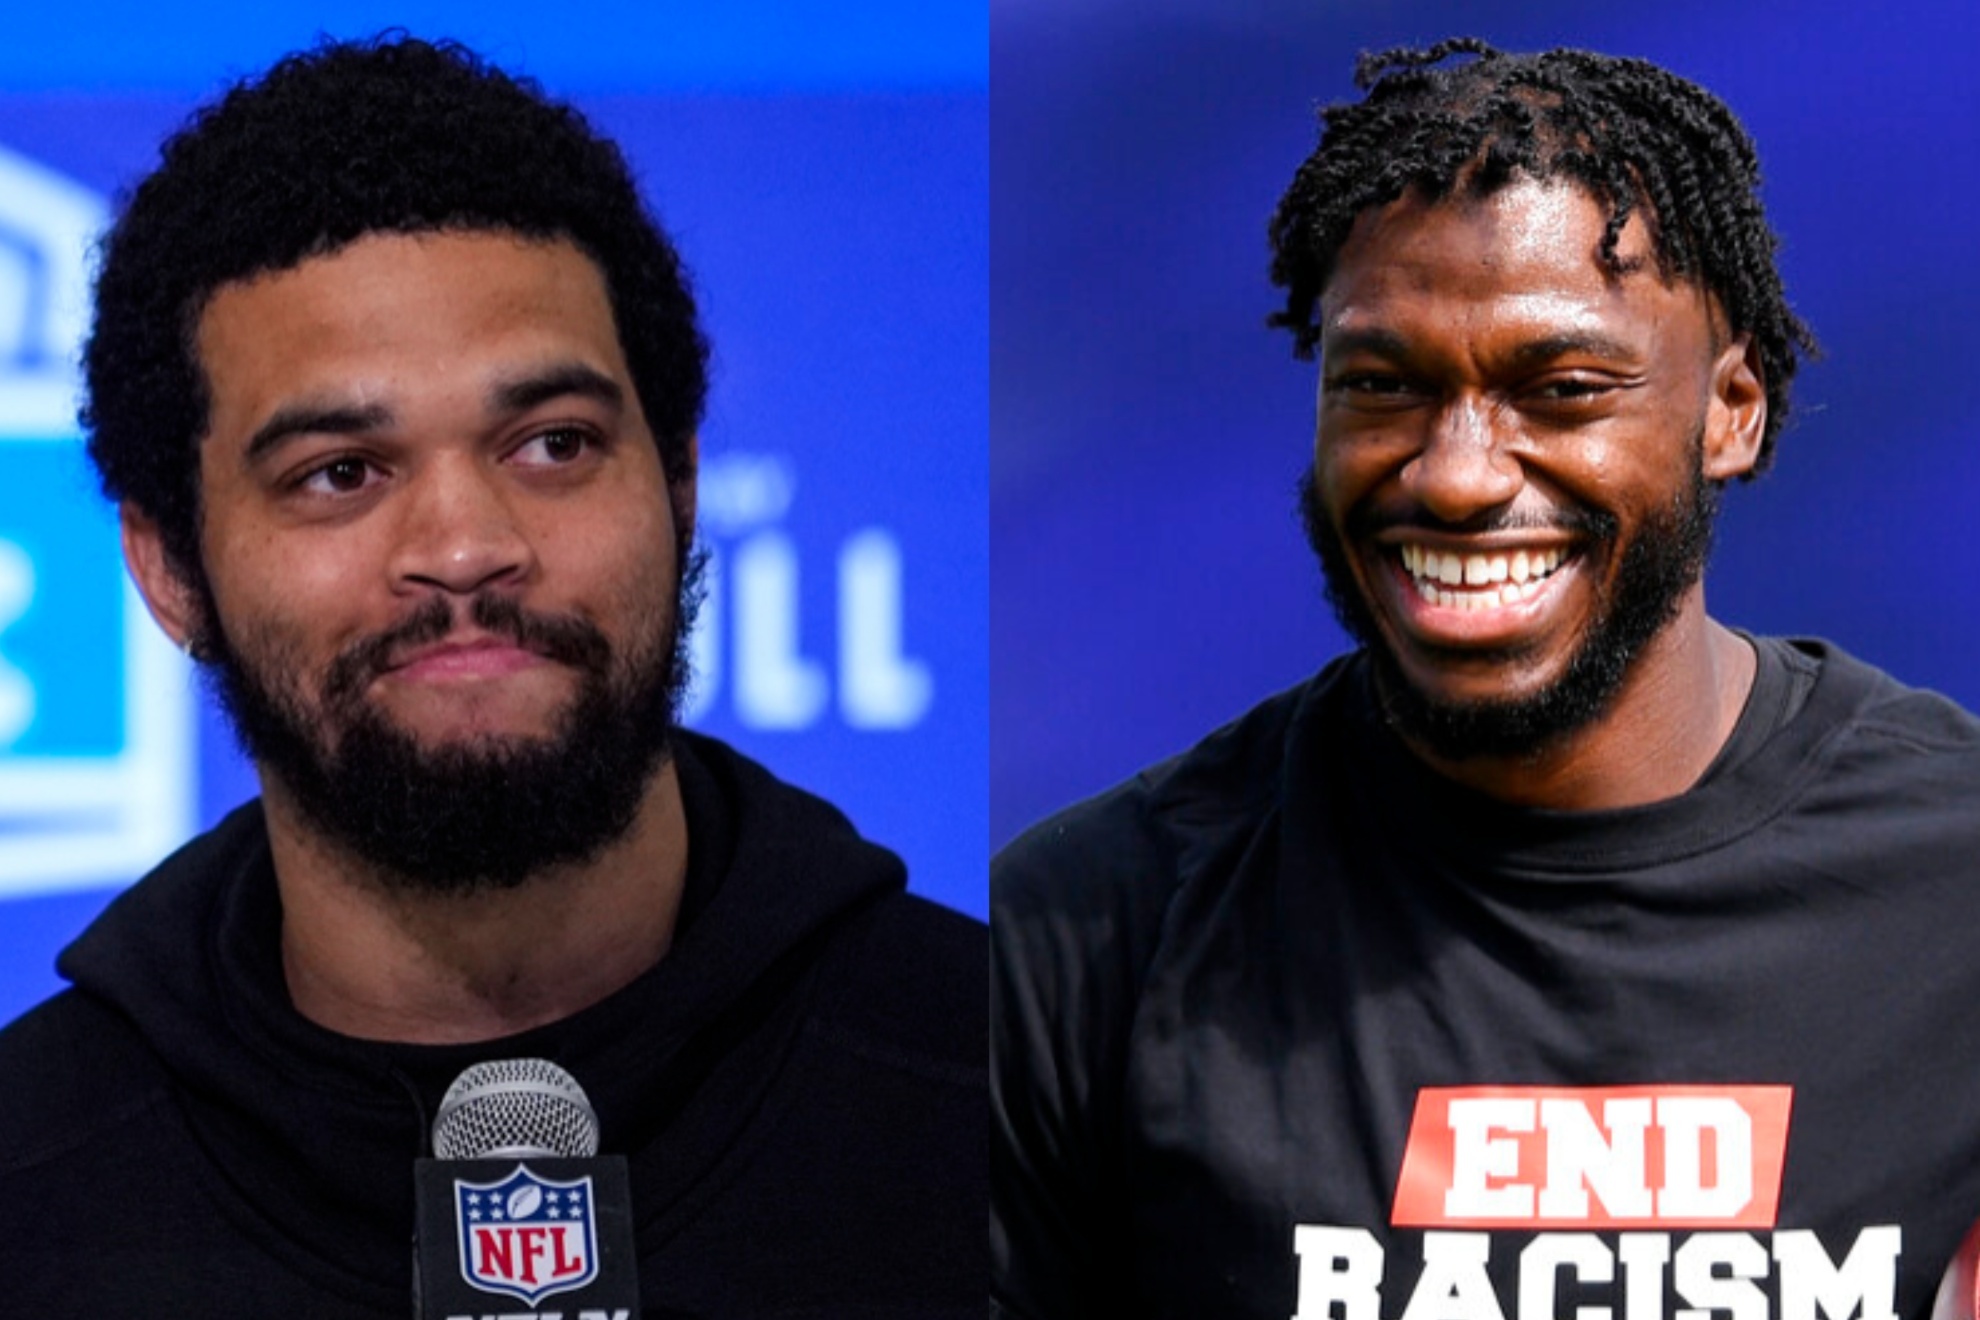 Robert Griffin III shared some advise for Caleb Williams ahead of the NFL Draft